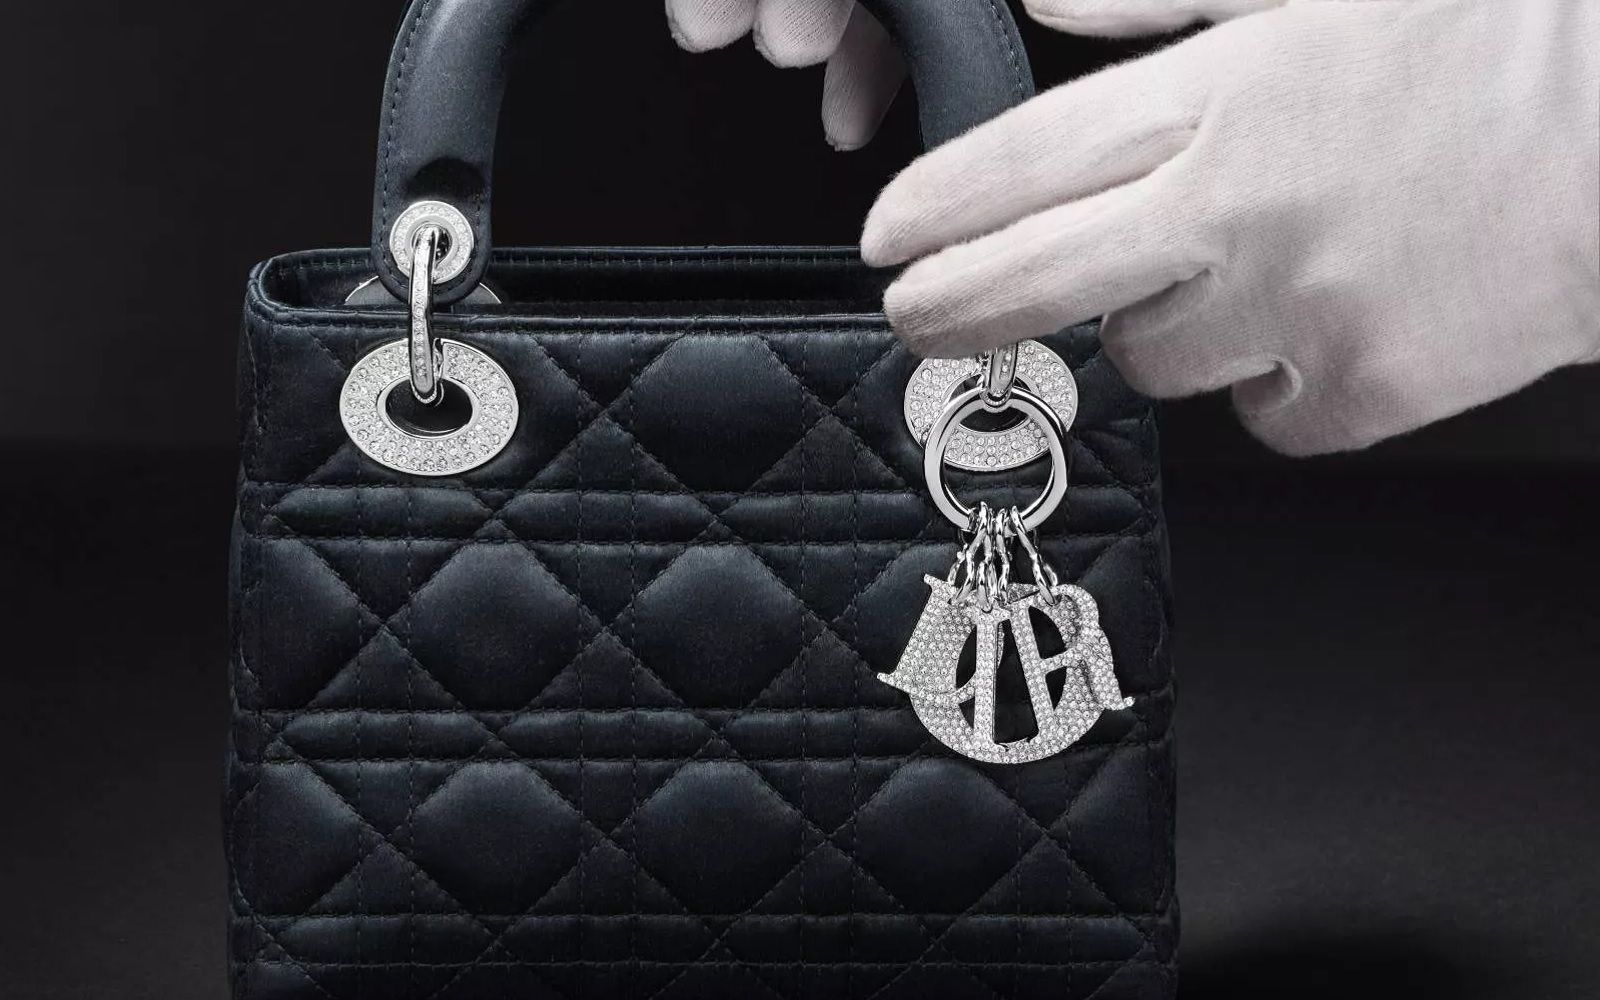 Why is Dior's Lady Bag so Famous? Dior Lady Diana Bag History